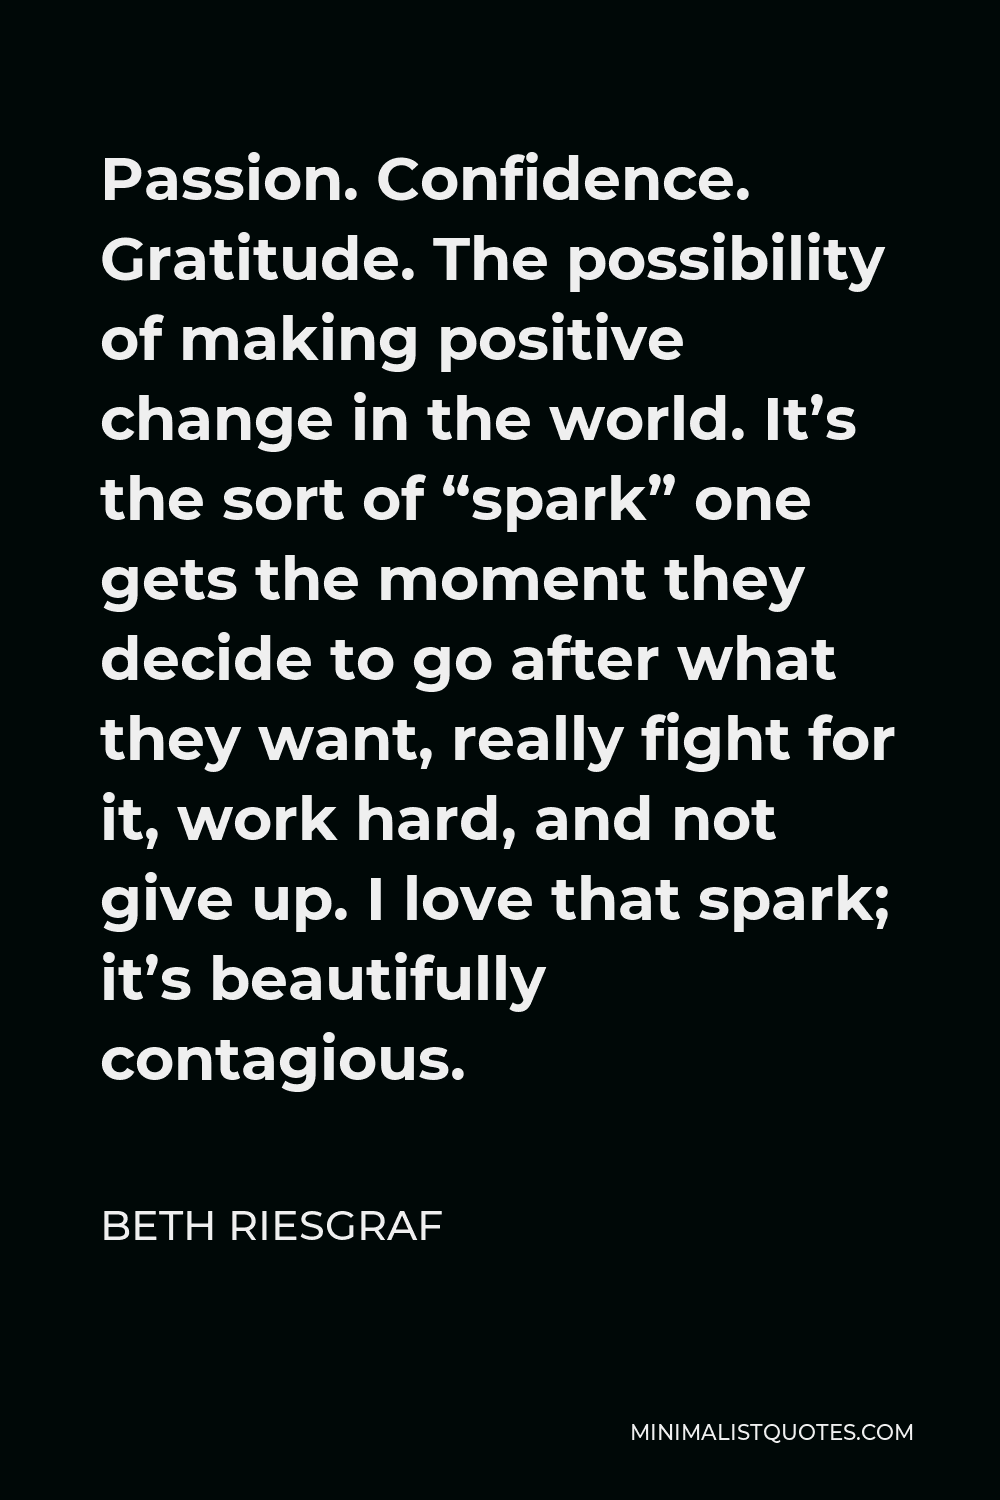 Beth Riesgraf Quote - Passion. Confidence. Gratitude. The possibility of making positive change in the world. It’s the sort of “spark” one gets the moment they decide to go after what they want, really fight for it, work hard, and not give up. I love that spark; it’s beautifully contagious.